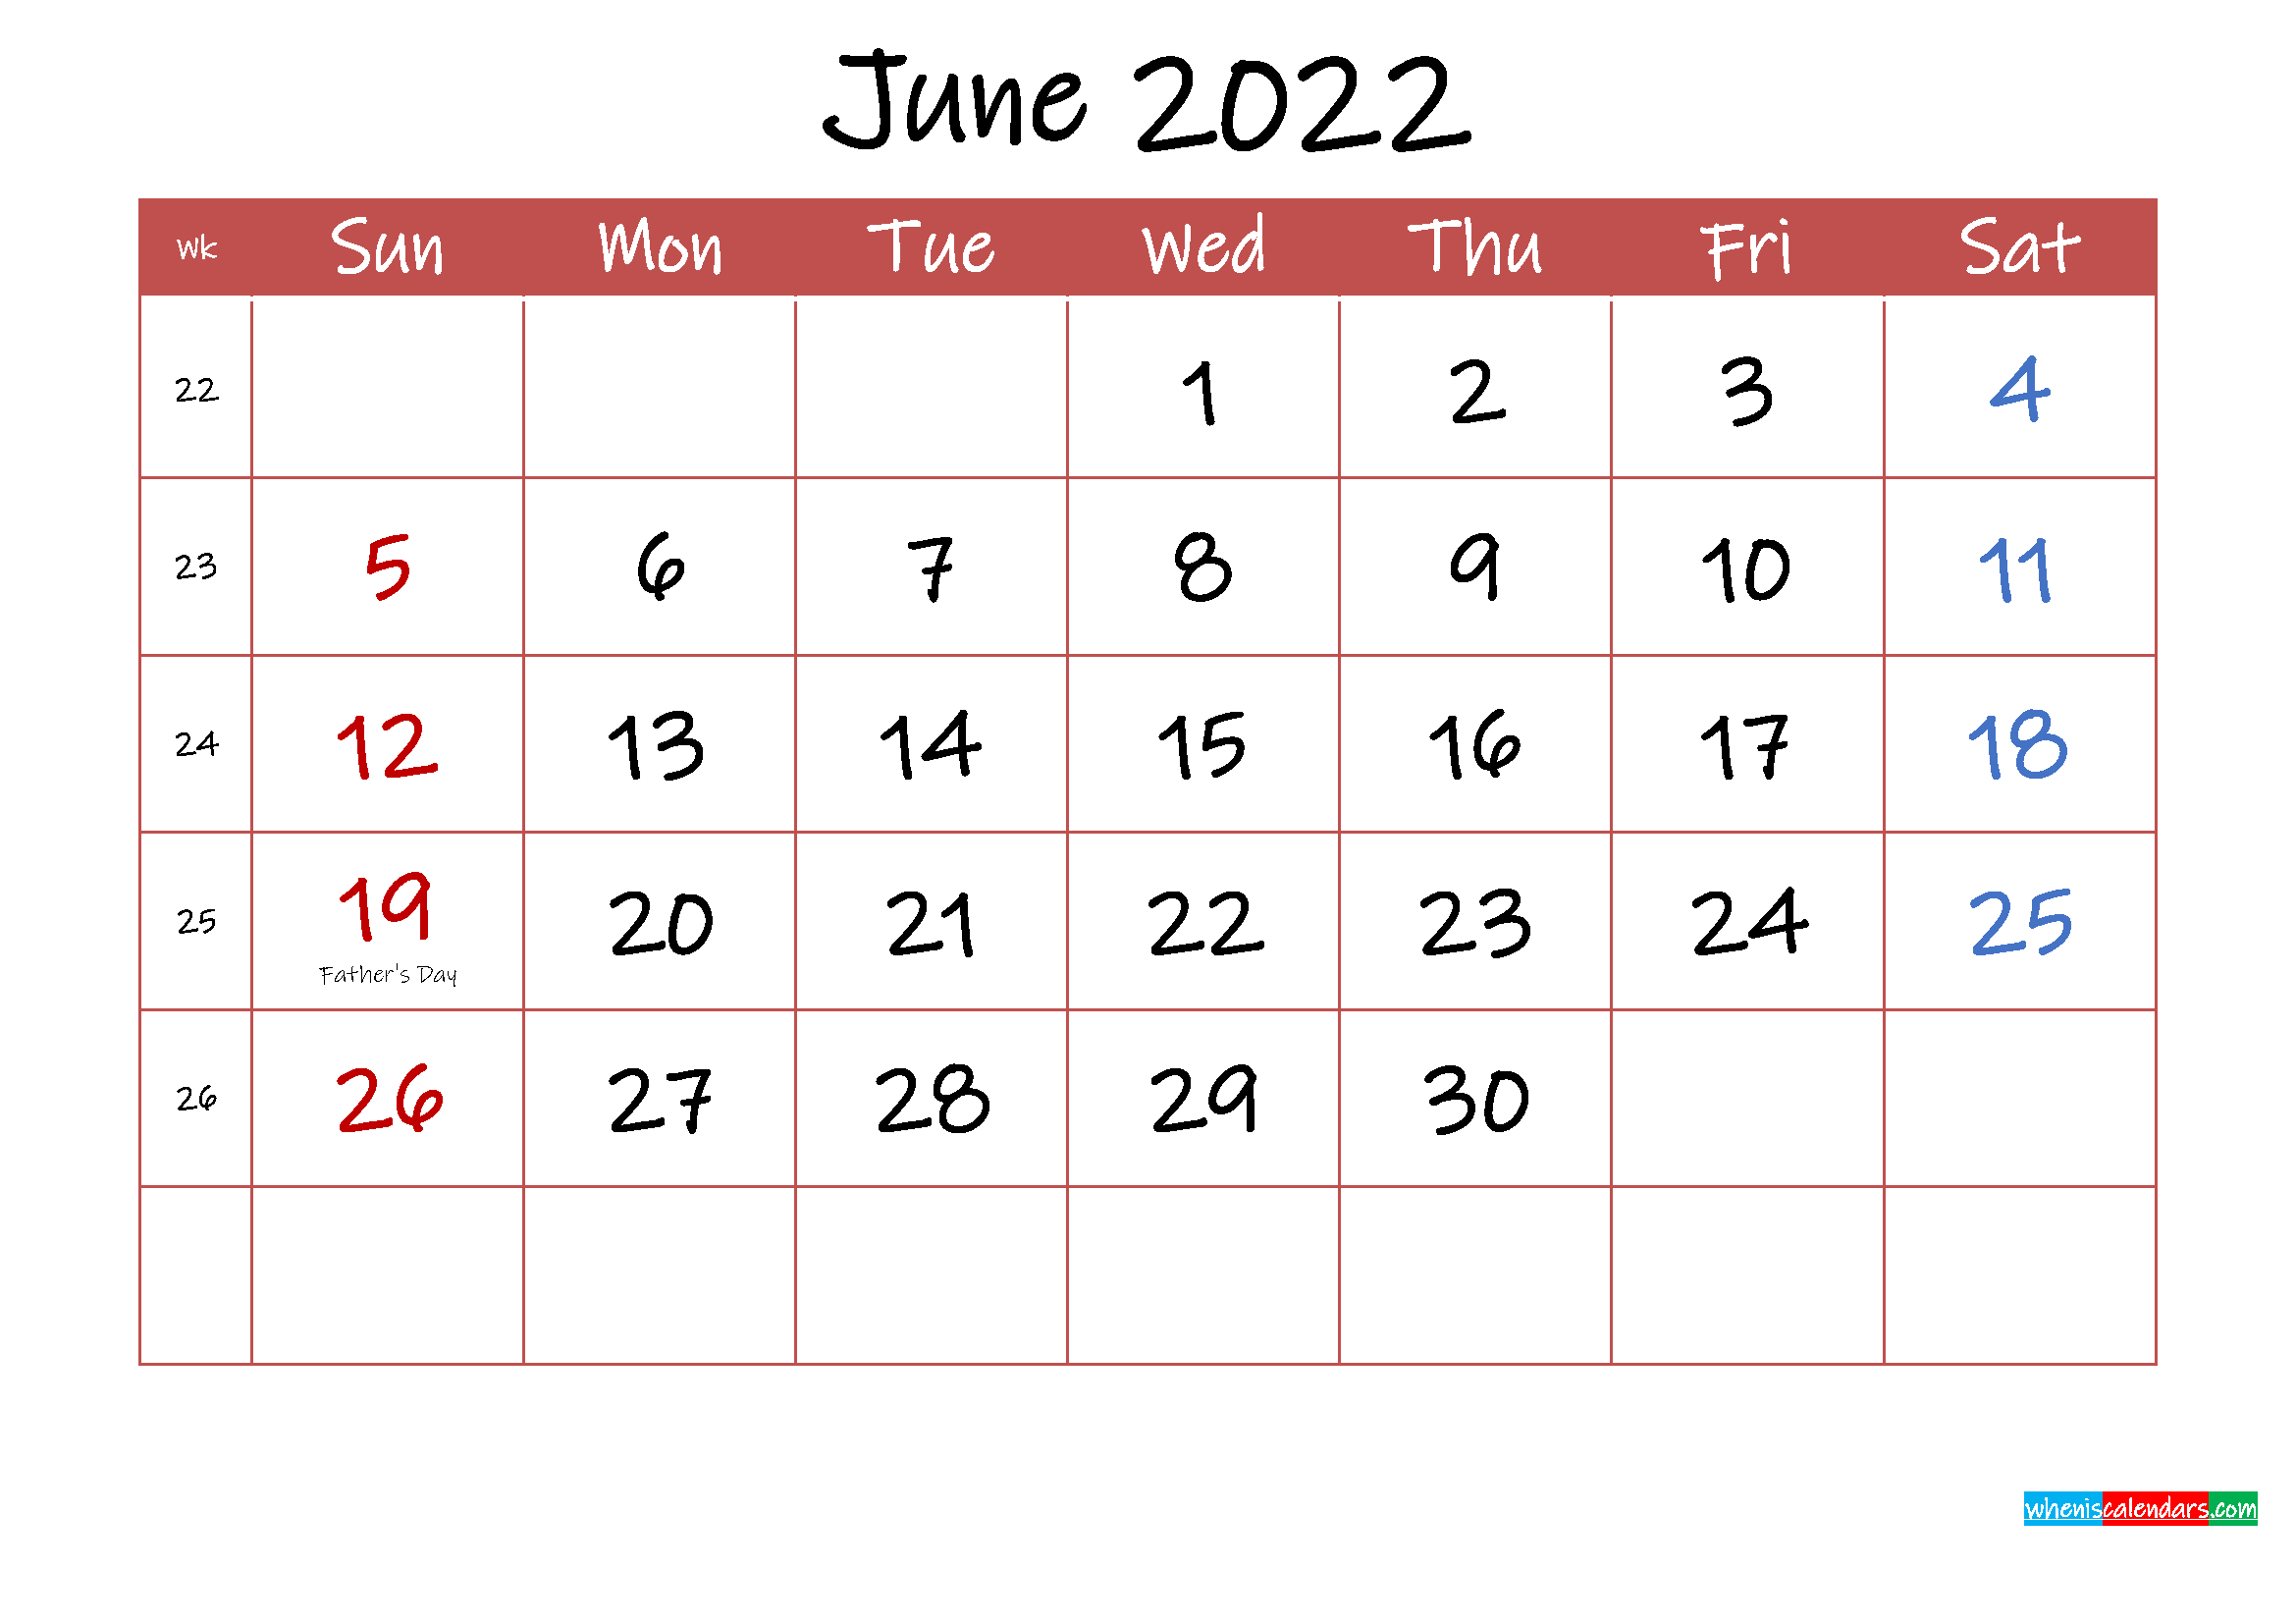 Printable June 2022 Calendar With Holidays - Template Ink22M30